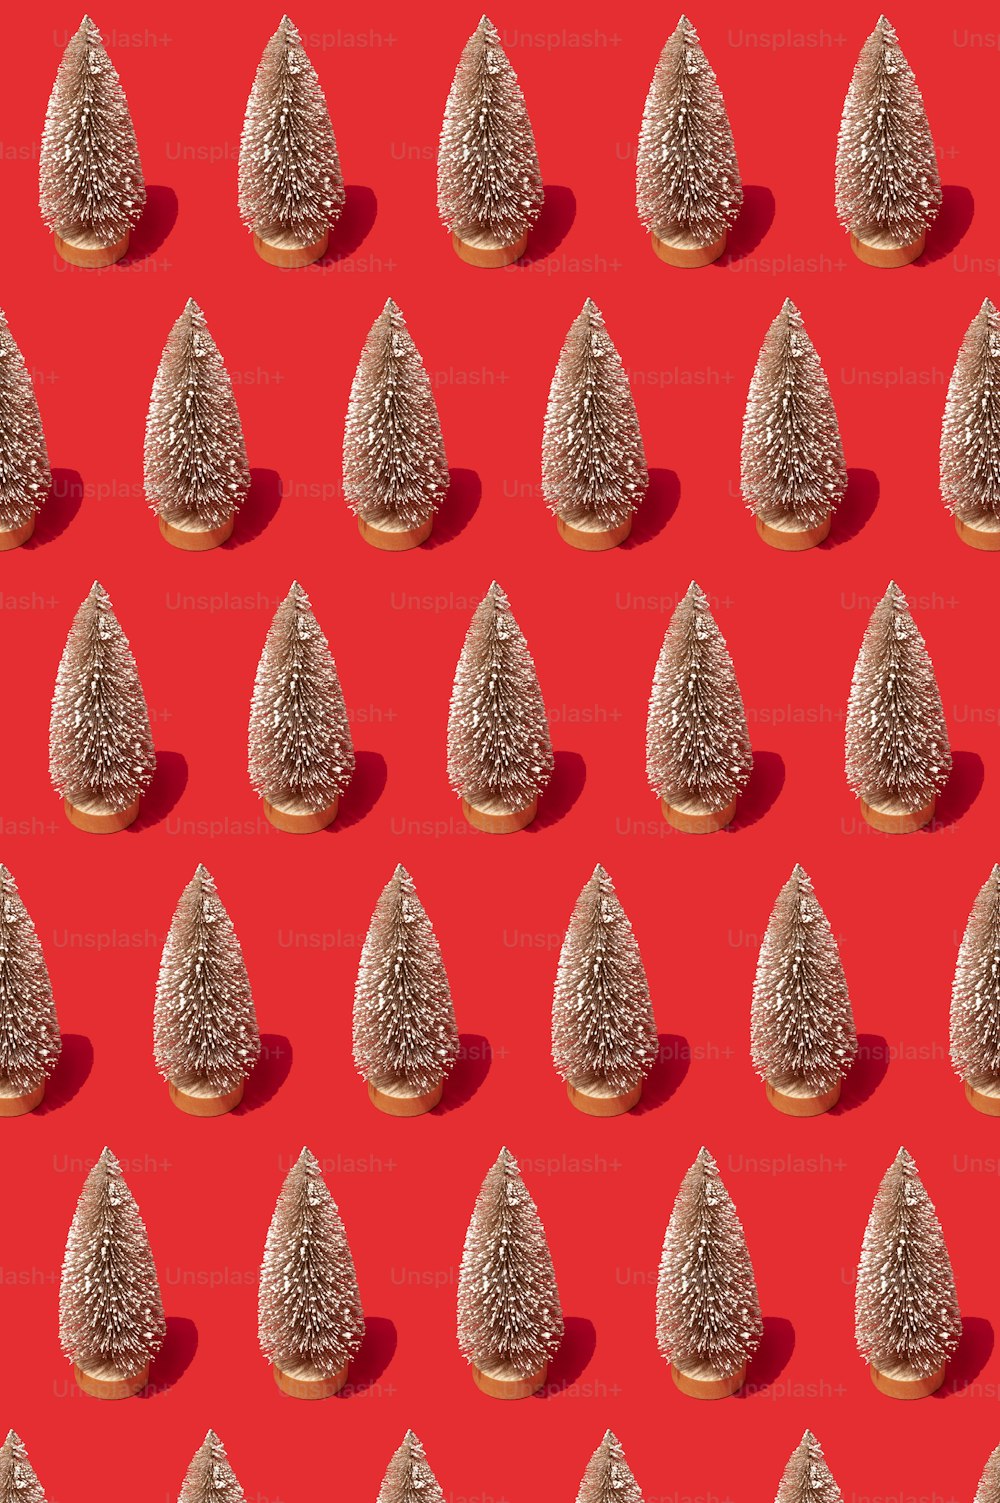 a red background with a pattern of small trees